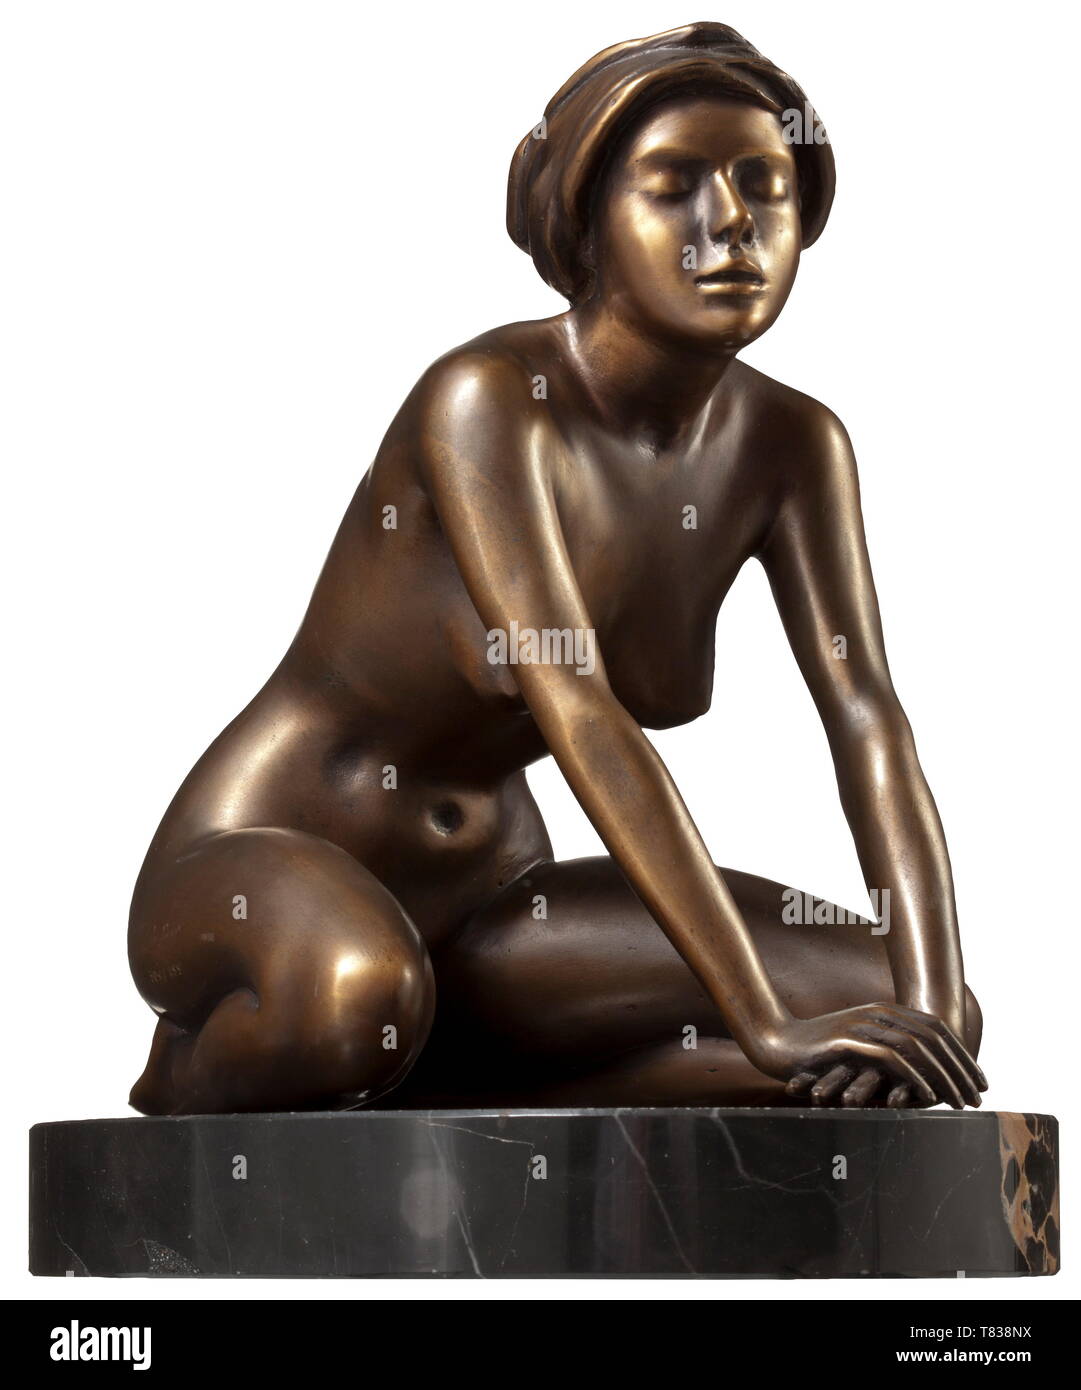 Arno Breker (1900 - 1991) - Girl with a Headscarf Bronze with brown patina. Signed on the right calf 'Arno Breker', foundry stamp 'venturi arte' and number '308/499'. On beautiful marble base. Total height circa 23 cm. Good condition. Impressive, elegantly formed bronze statuette. Arno Breker is regarded as one of the most significant sculptors of classical tradition in the 20th century. In the long French-influenced European sculpting tradition he ranks among such names as Auguste Rodin, Charles Despiau and Aristide Maillol. historic, historical, 20th century, 1930s, 1940s, Editorial-Use-Only Stock Photo